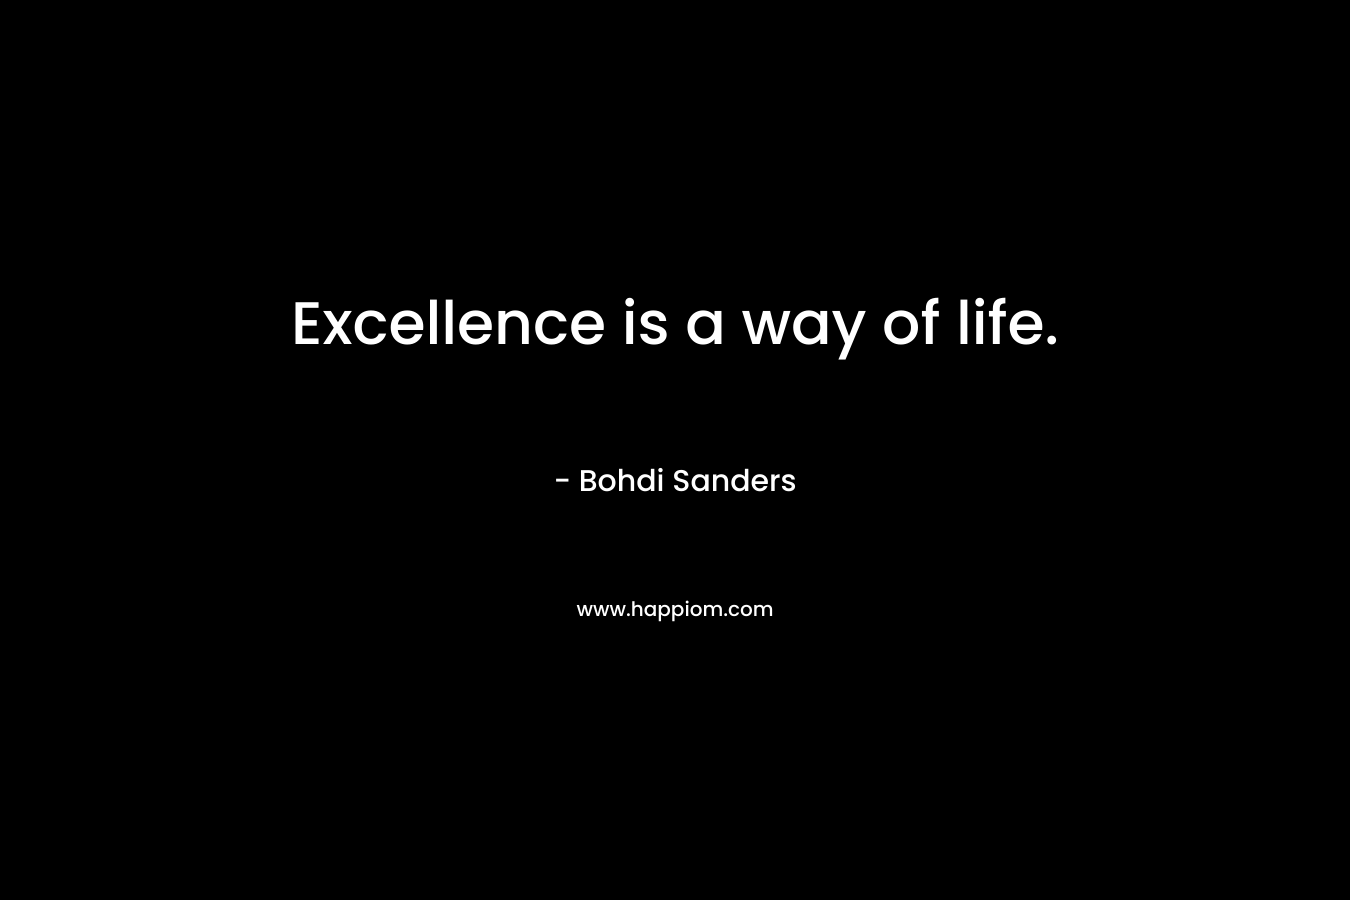 Excellence is a way of life.